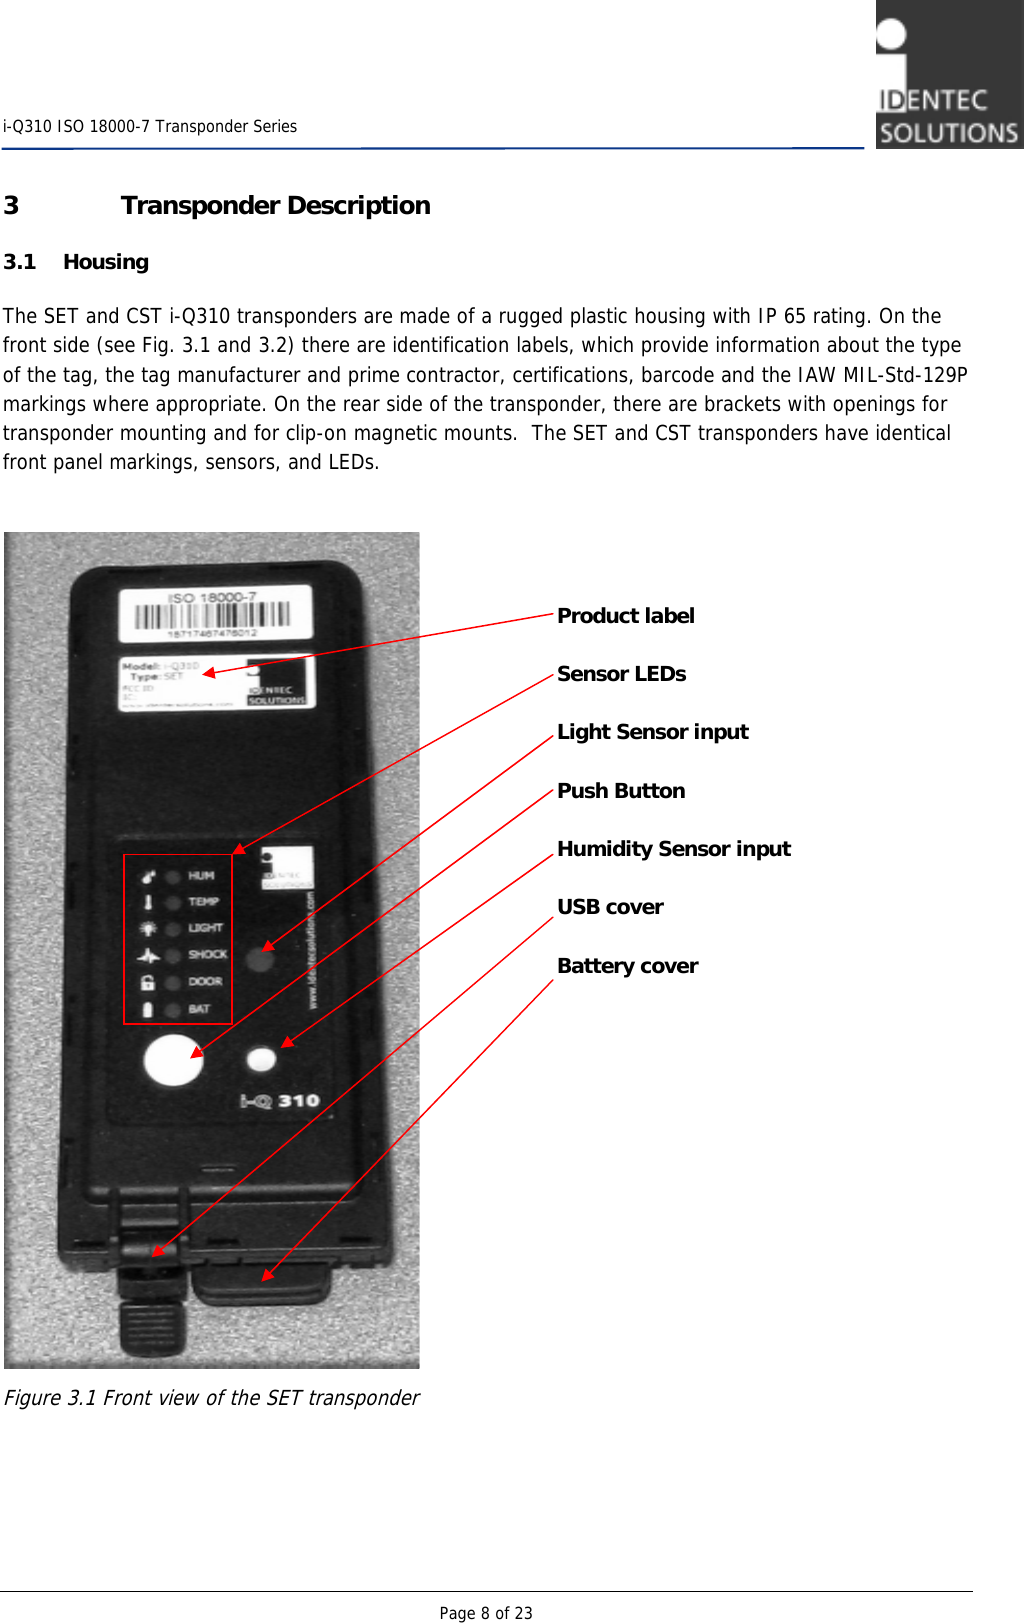    i-Q310 ISO 18000-7 Transponder Series  Page 8 of 23 3 Transponder Description 3.1 Housing The SET and CST i-Q310 transponders are made of a rugged plastic housing with IP 65 rating. On the front side (see Fig. 3.1 and 3.2) there are identification labels, which provide information about the type of the tag, the tag manufacturer and prime contractor, certifications, barcode and the IAW MIL-Std-129P markings where appropriate. On the rear side of the transponder, there are brackets with openings for transponder mounting and for clip-on magnetic mounts.  The SET and CST transponders have identical front panel markings, sensors, and LEDs.     Figure 3.1 Front view of the SET transponder   Product label  Sensor LEDs  Light Sensor input  Push Button  Humidity Sensor input  USB cover  Battery cover 